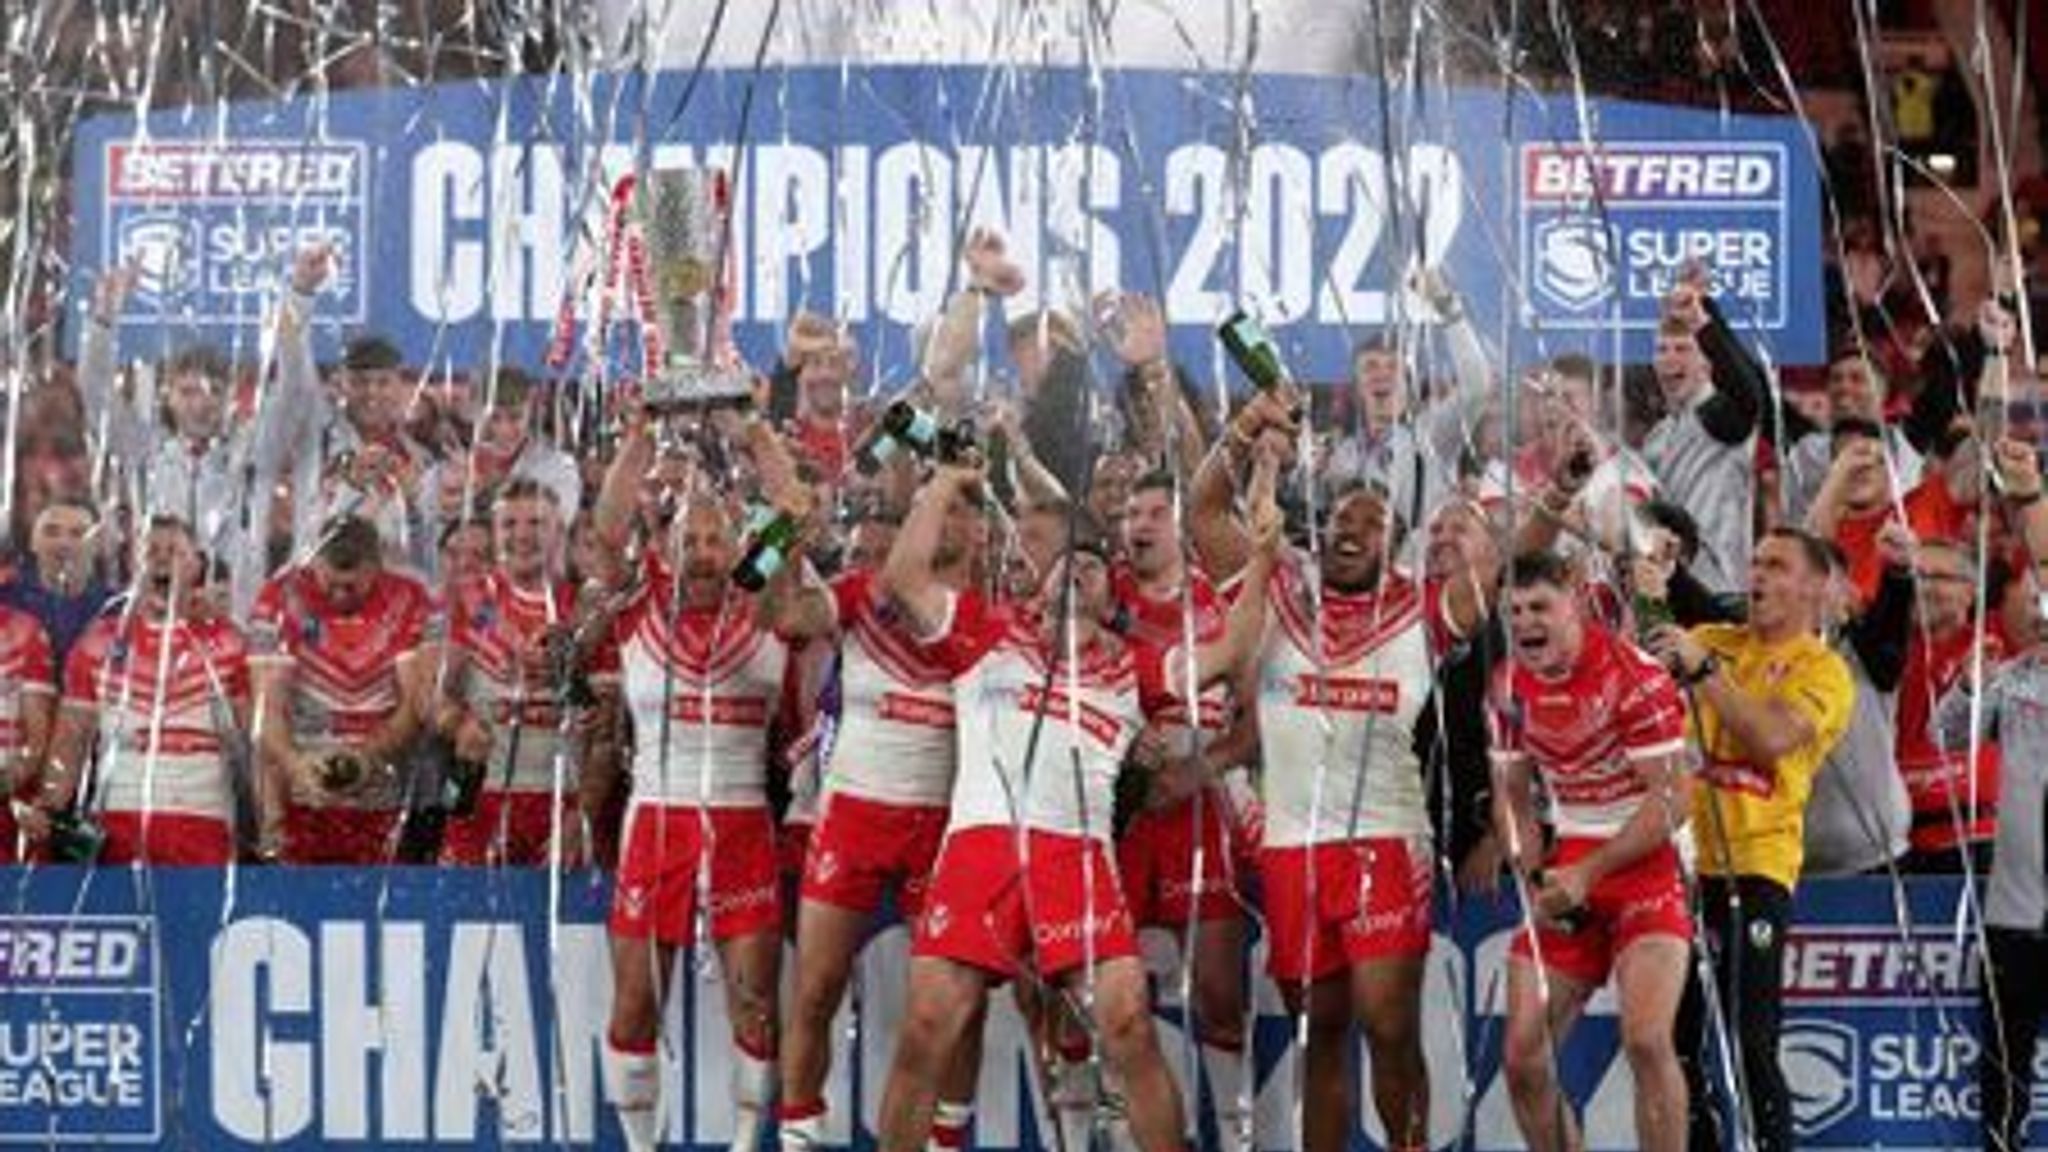 2023 Betfred Super League fixtures announced Warrington vs Leeds live on Sky Sports on opening day Rugby League News Sky Sports